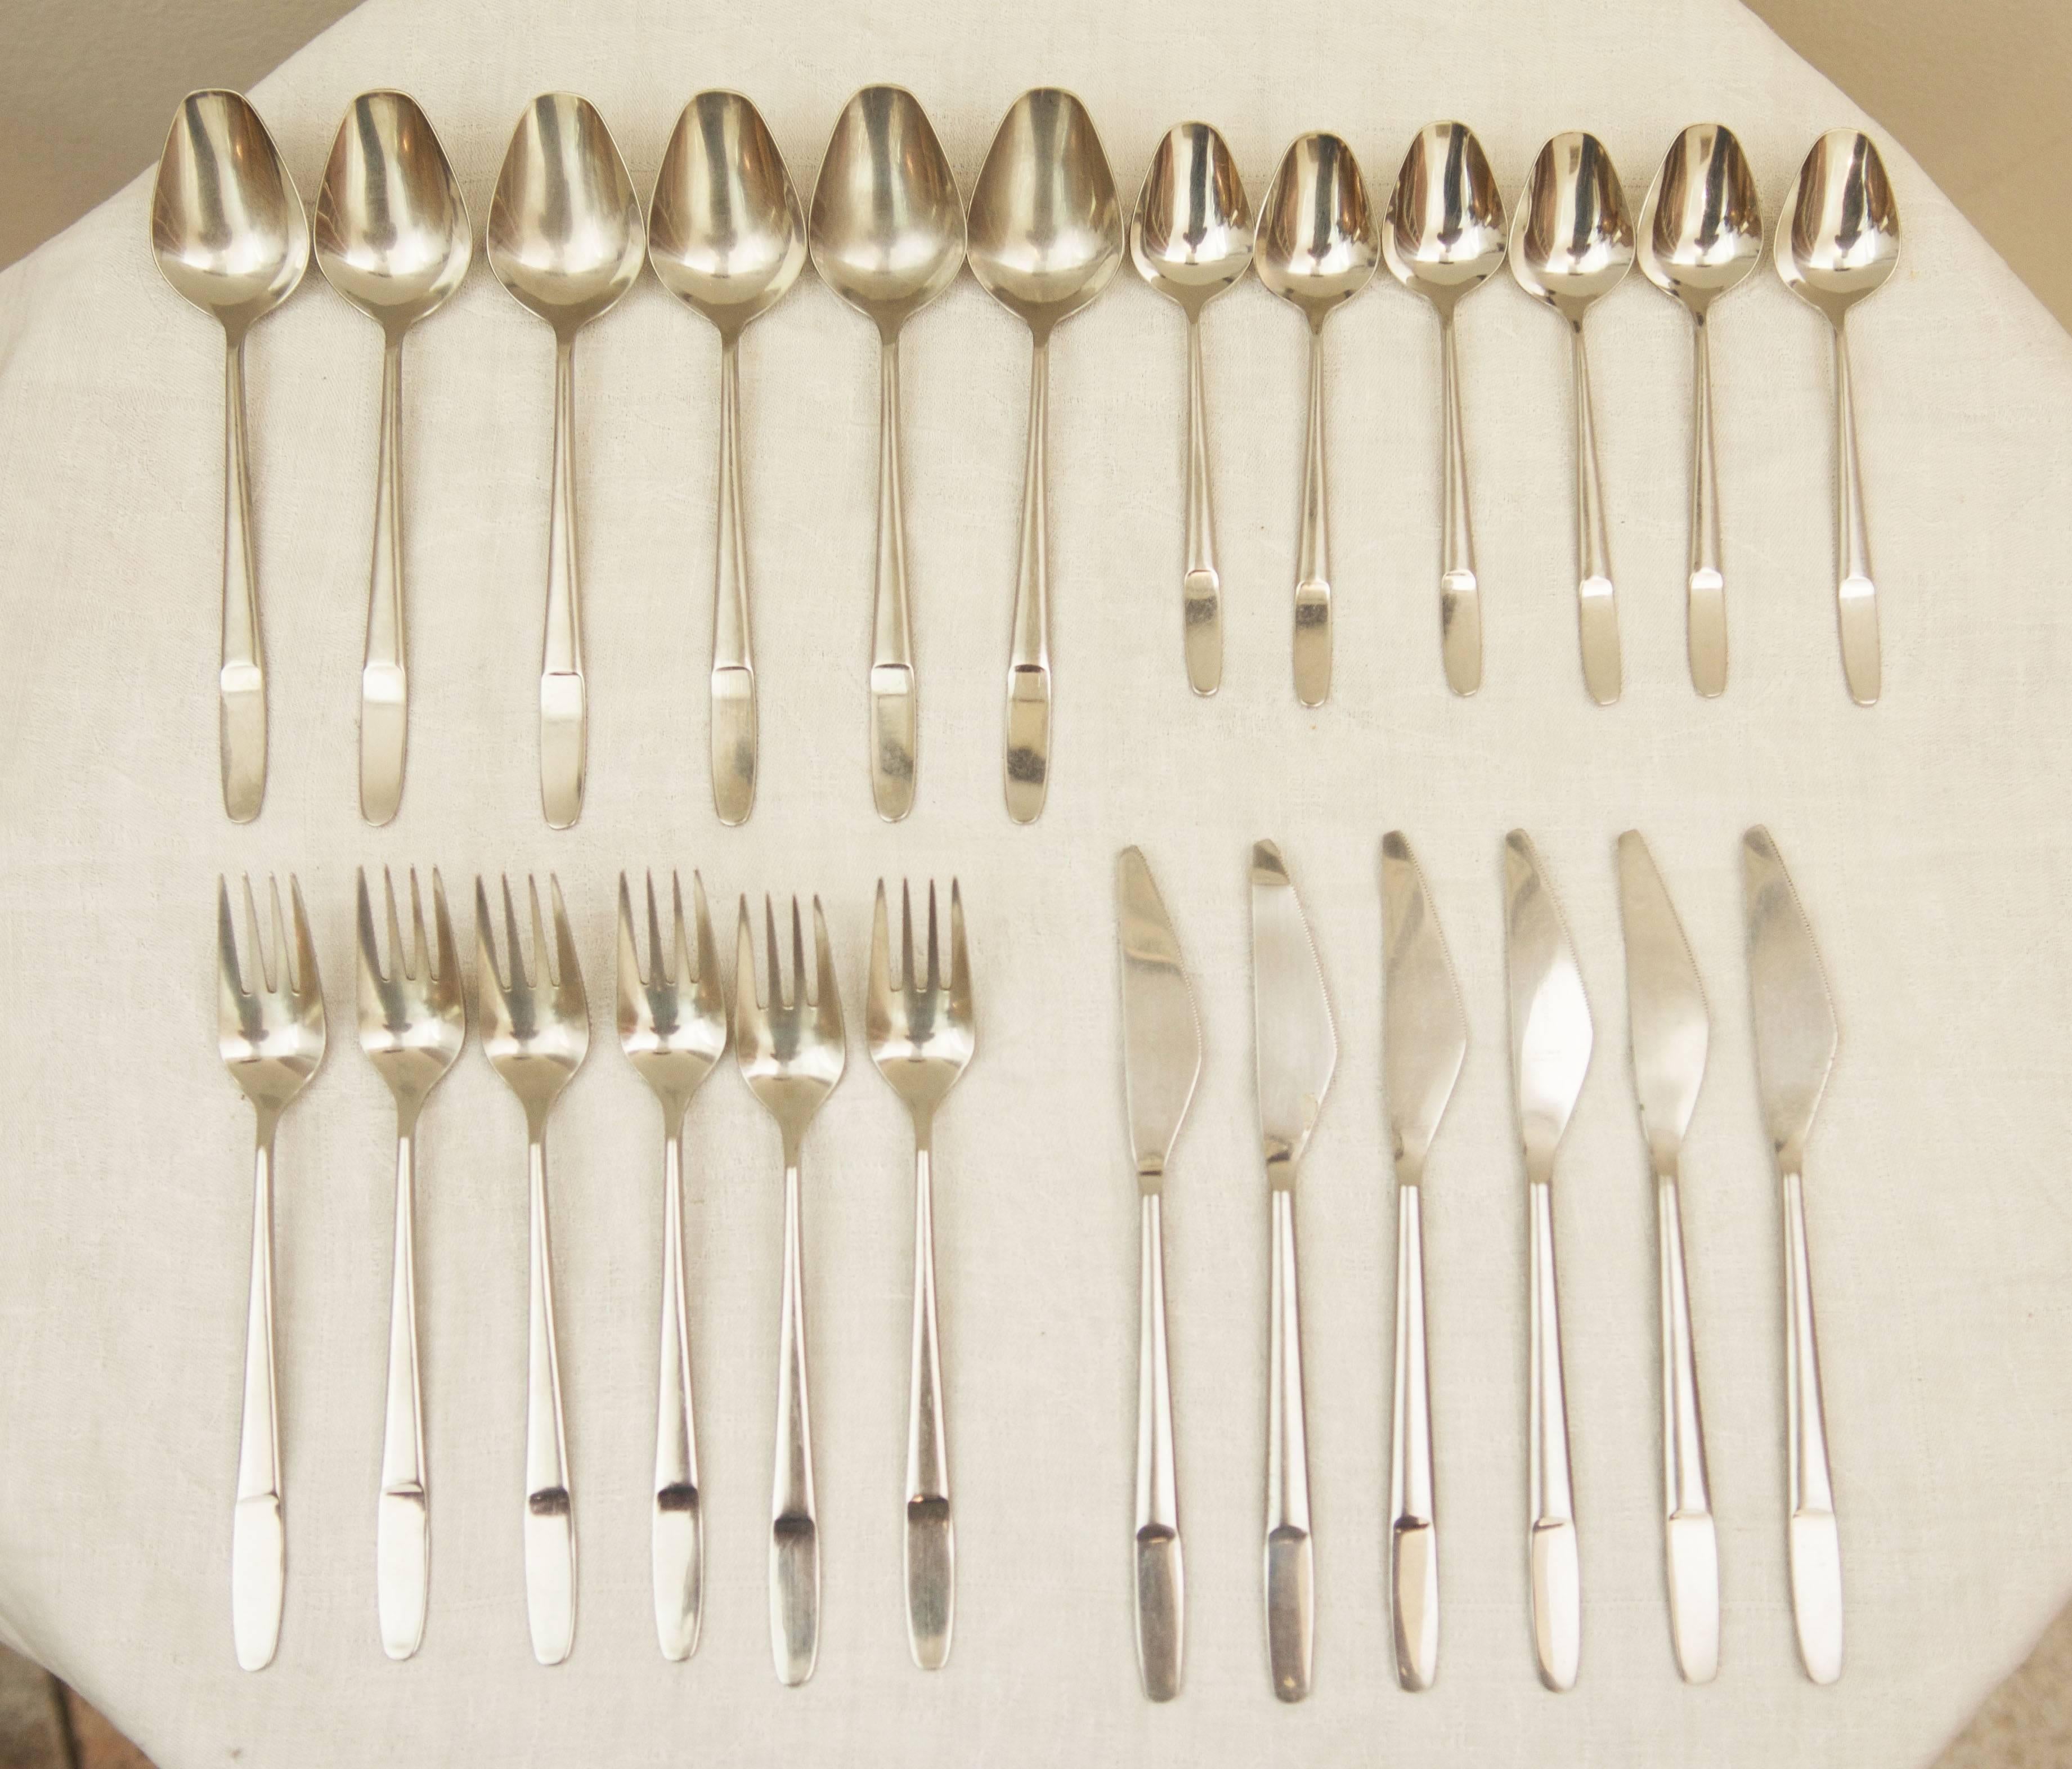 Cutlery, model 2070, designed by Helmut Alder, produced by 